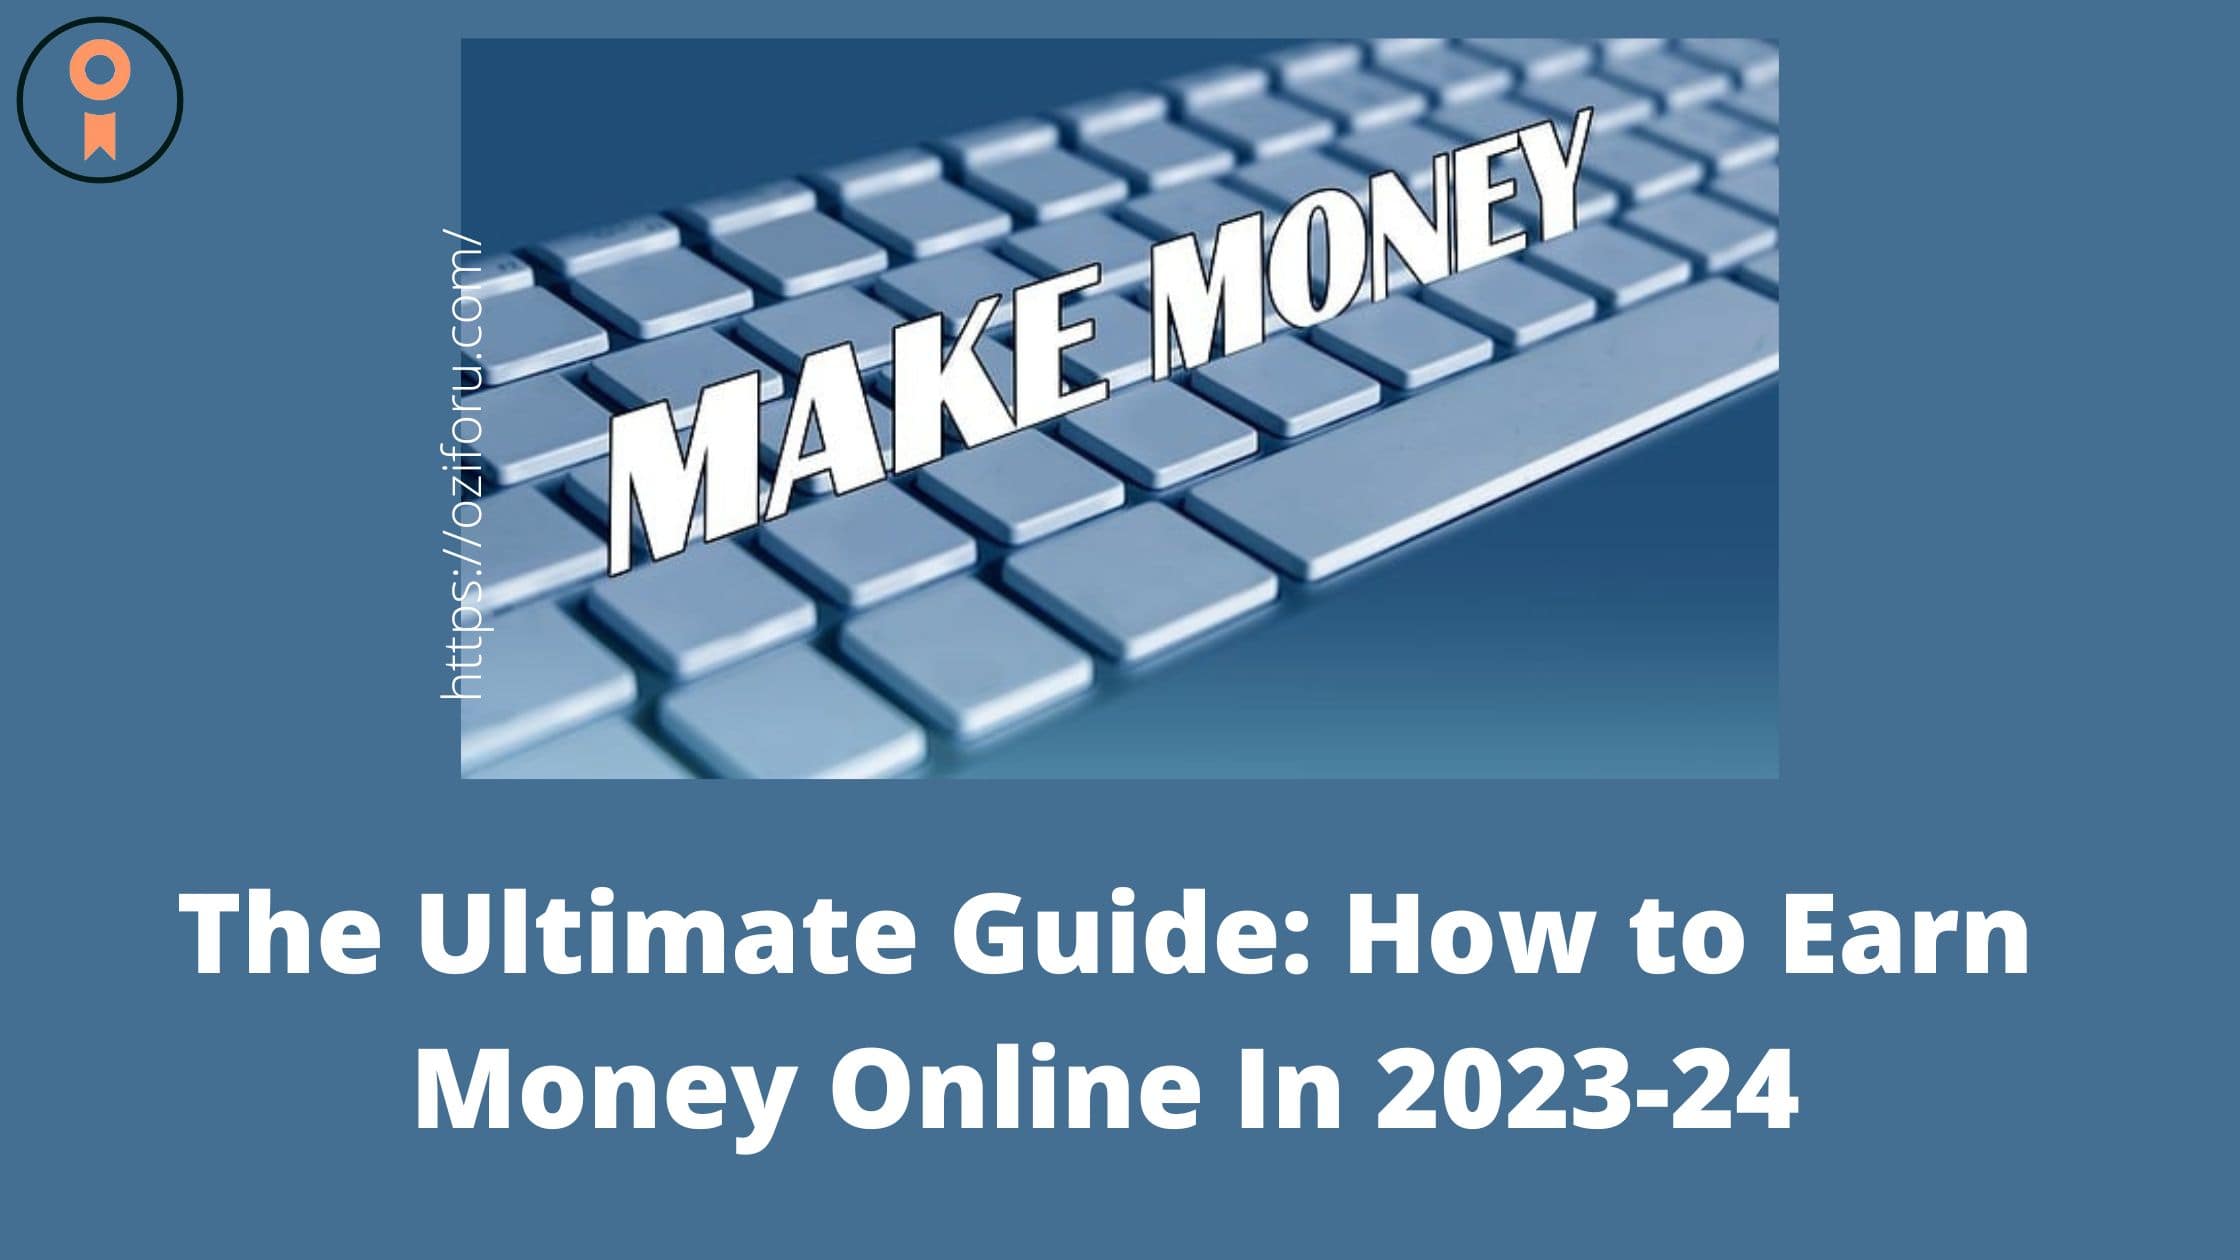 The Ultimate Guide: How to Earn Money Online In 2023-24